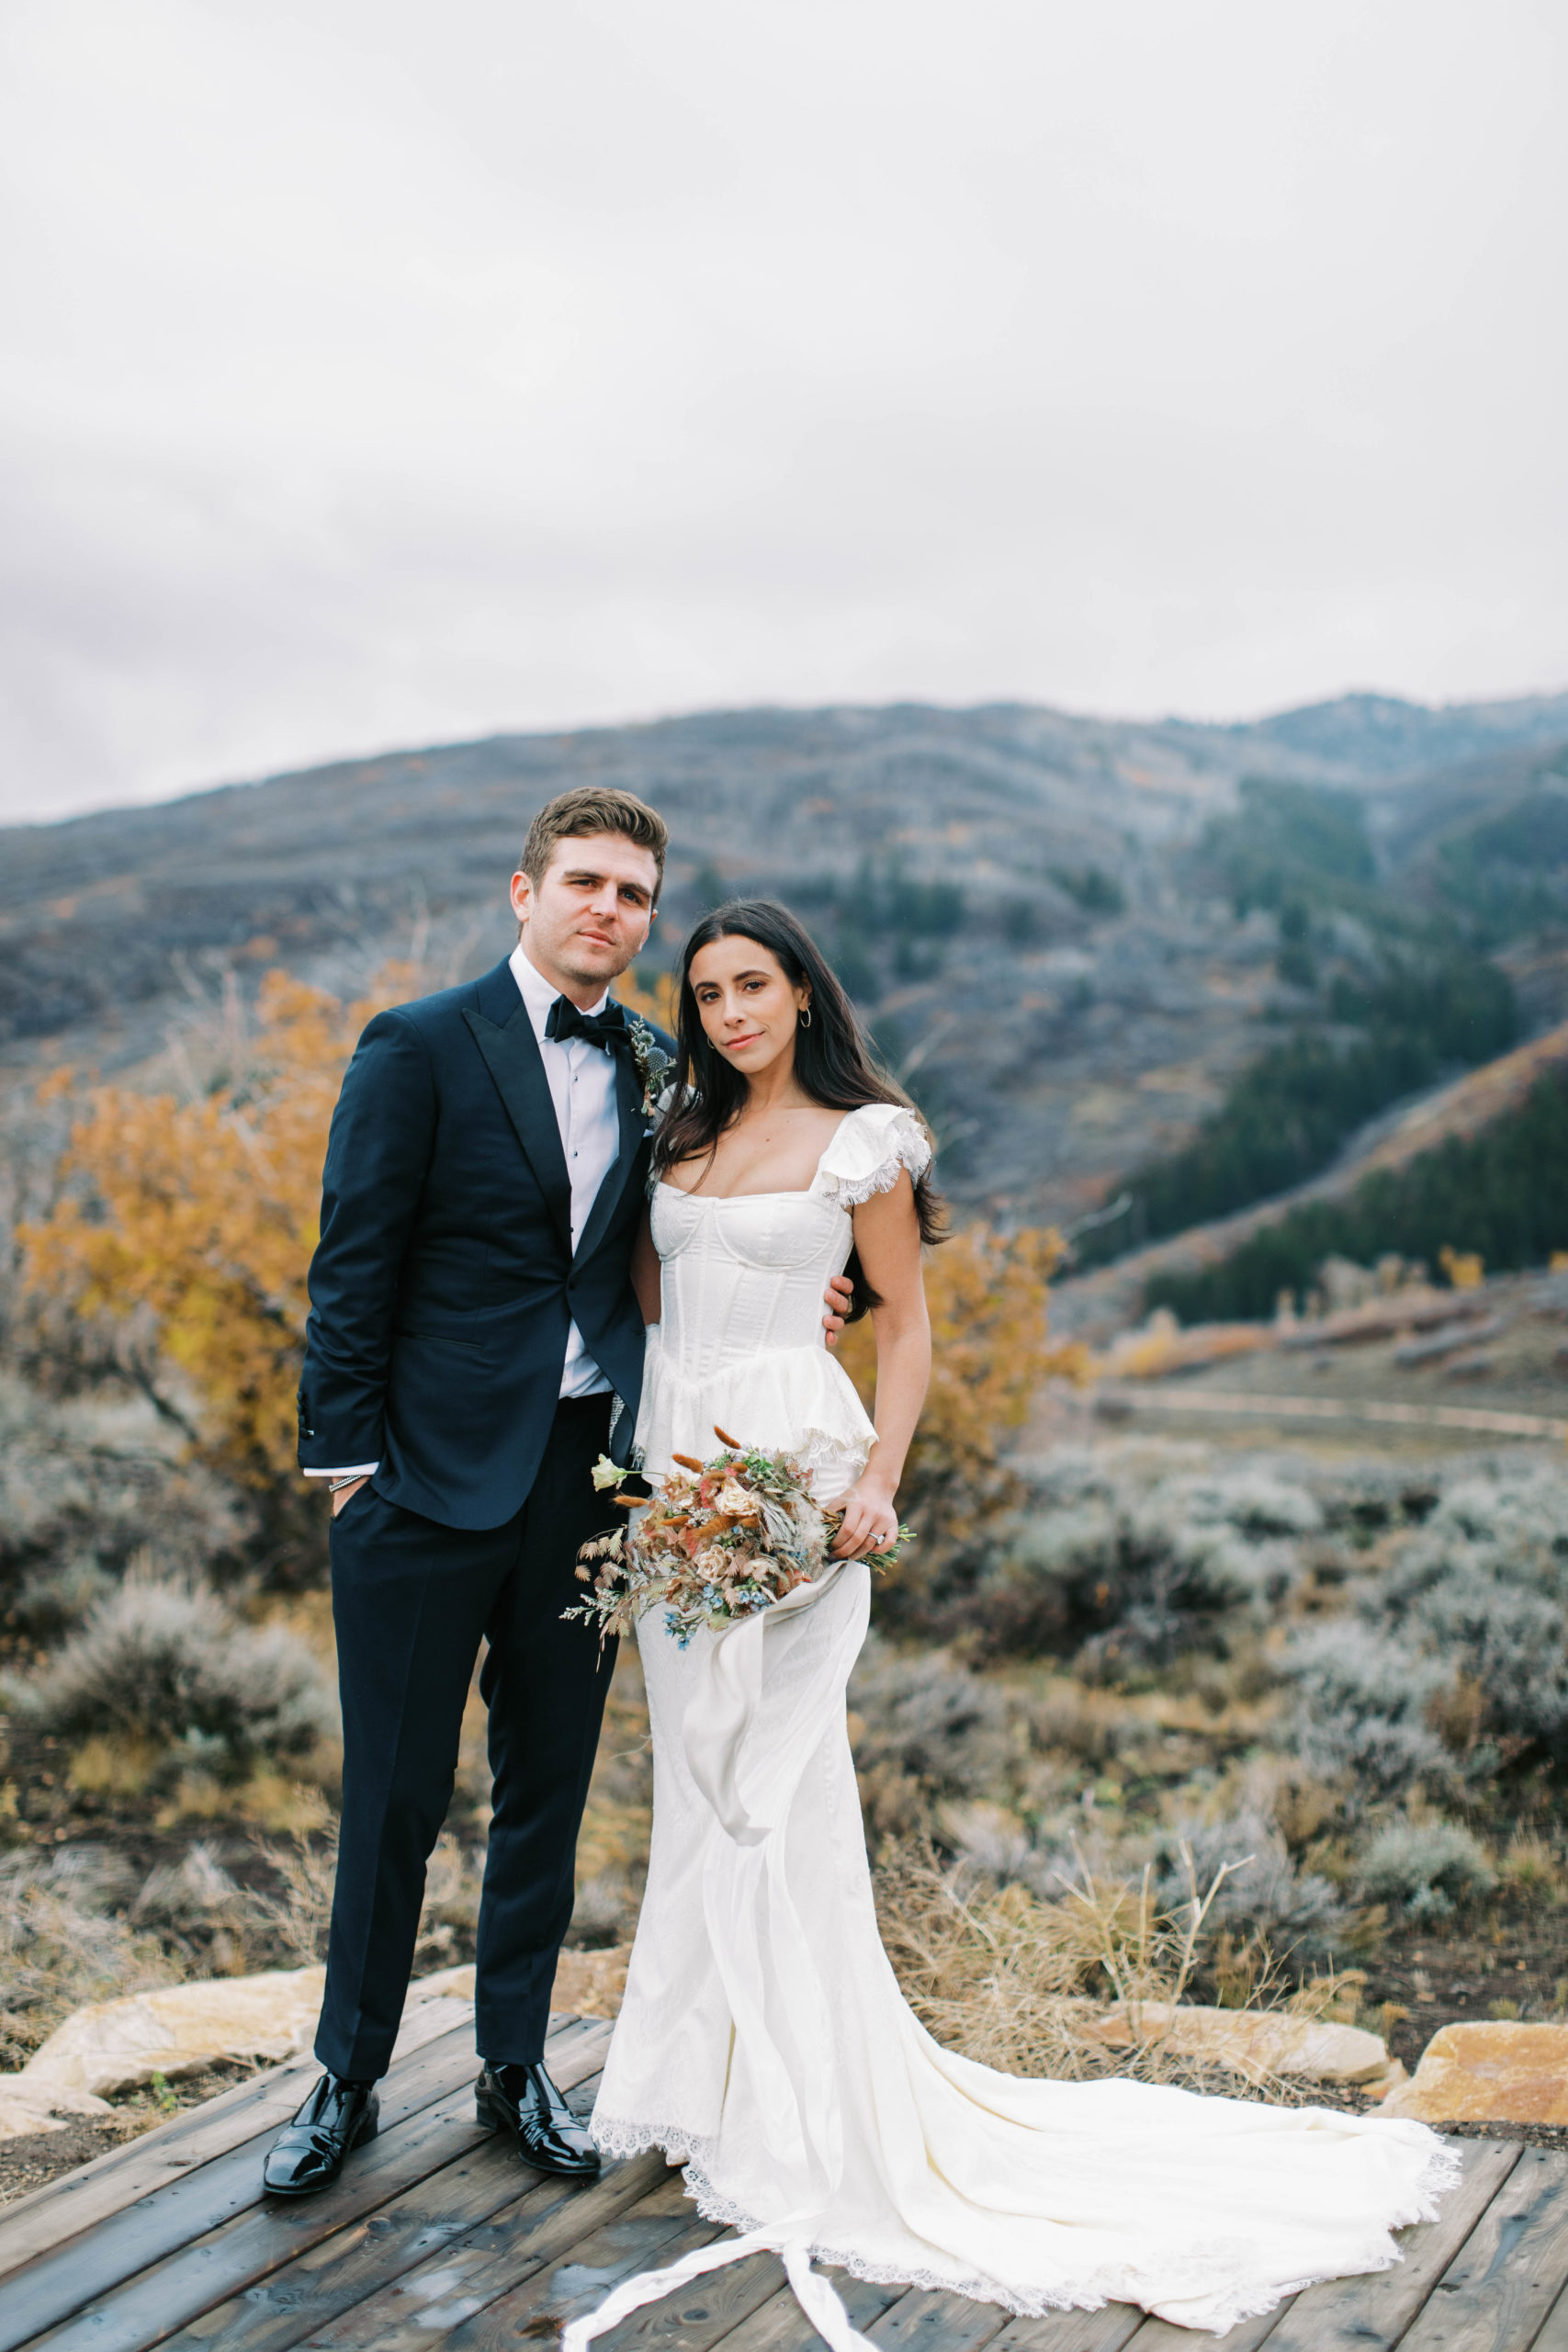 a bride and groom pose together for wedding portraits with mountains behind them at blue sky ranch in utah. photo taken by megan robinson photography